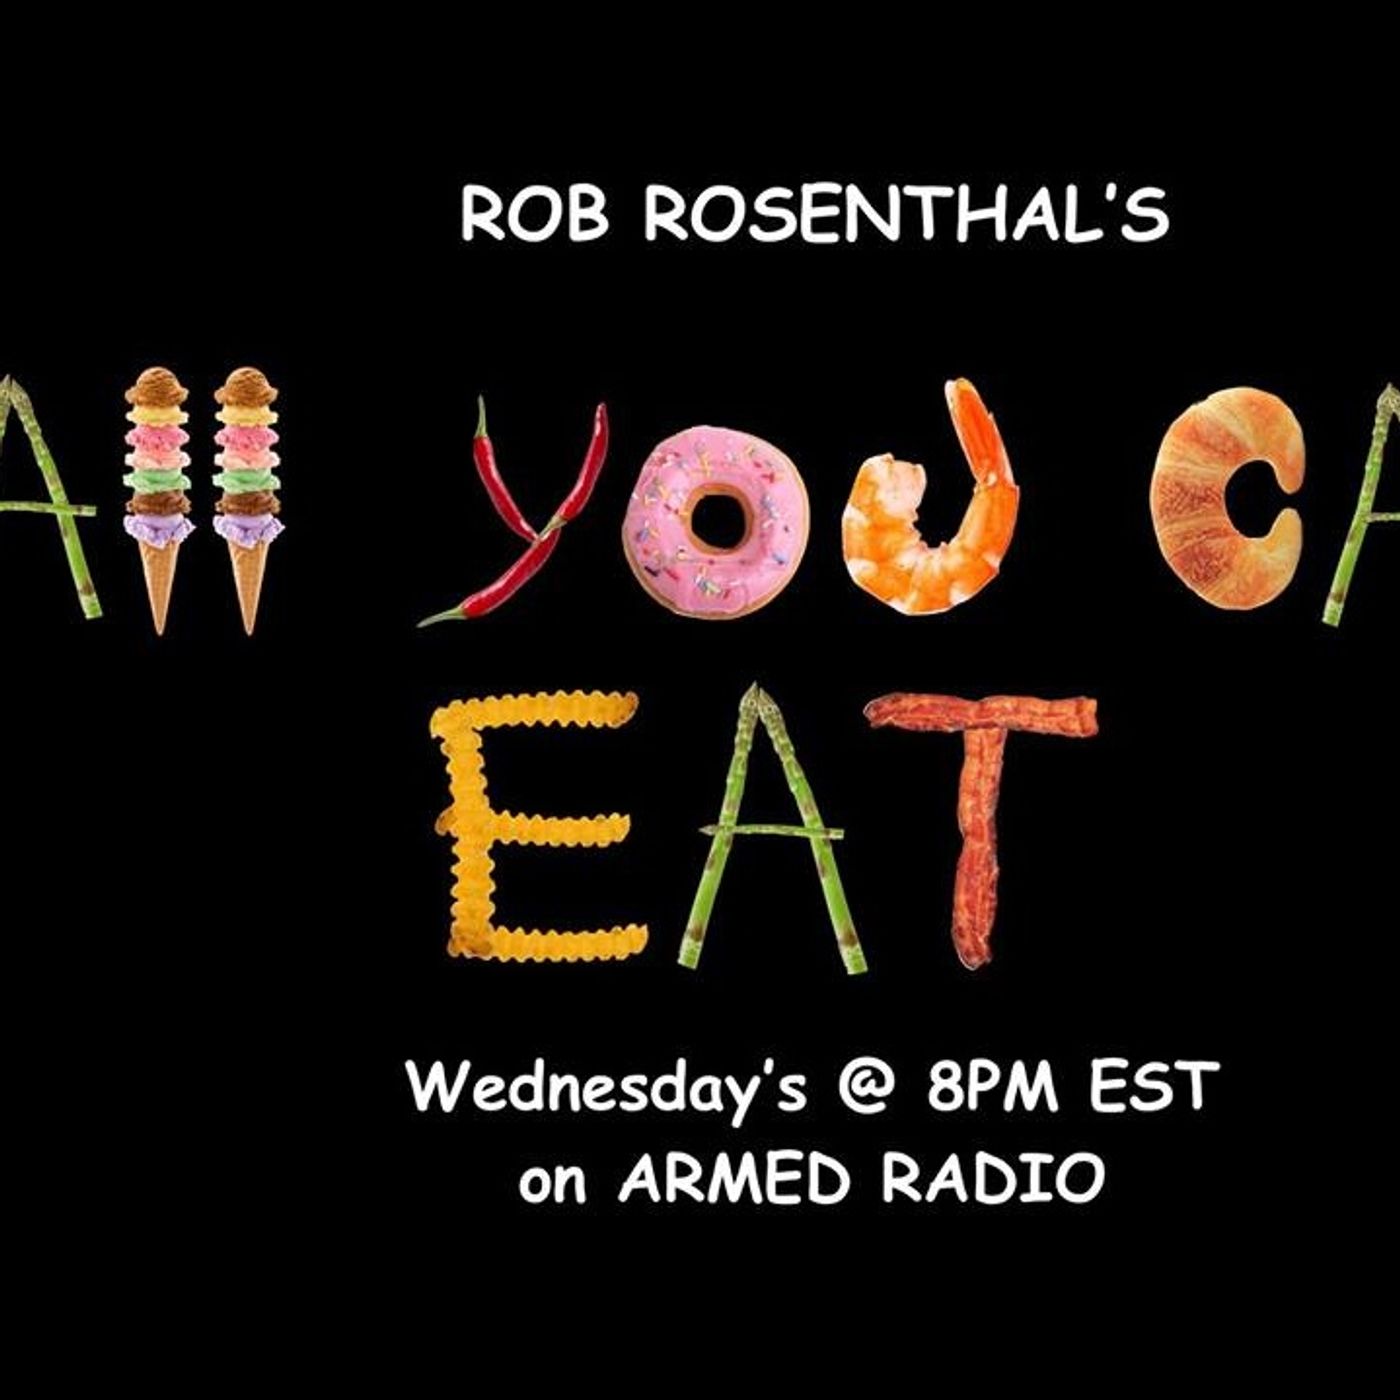 ALL YOU CAN EAT with ROB ROSENTHAL